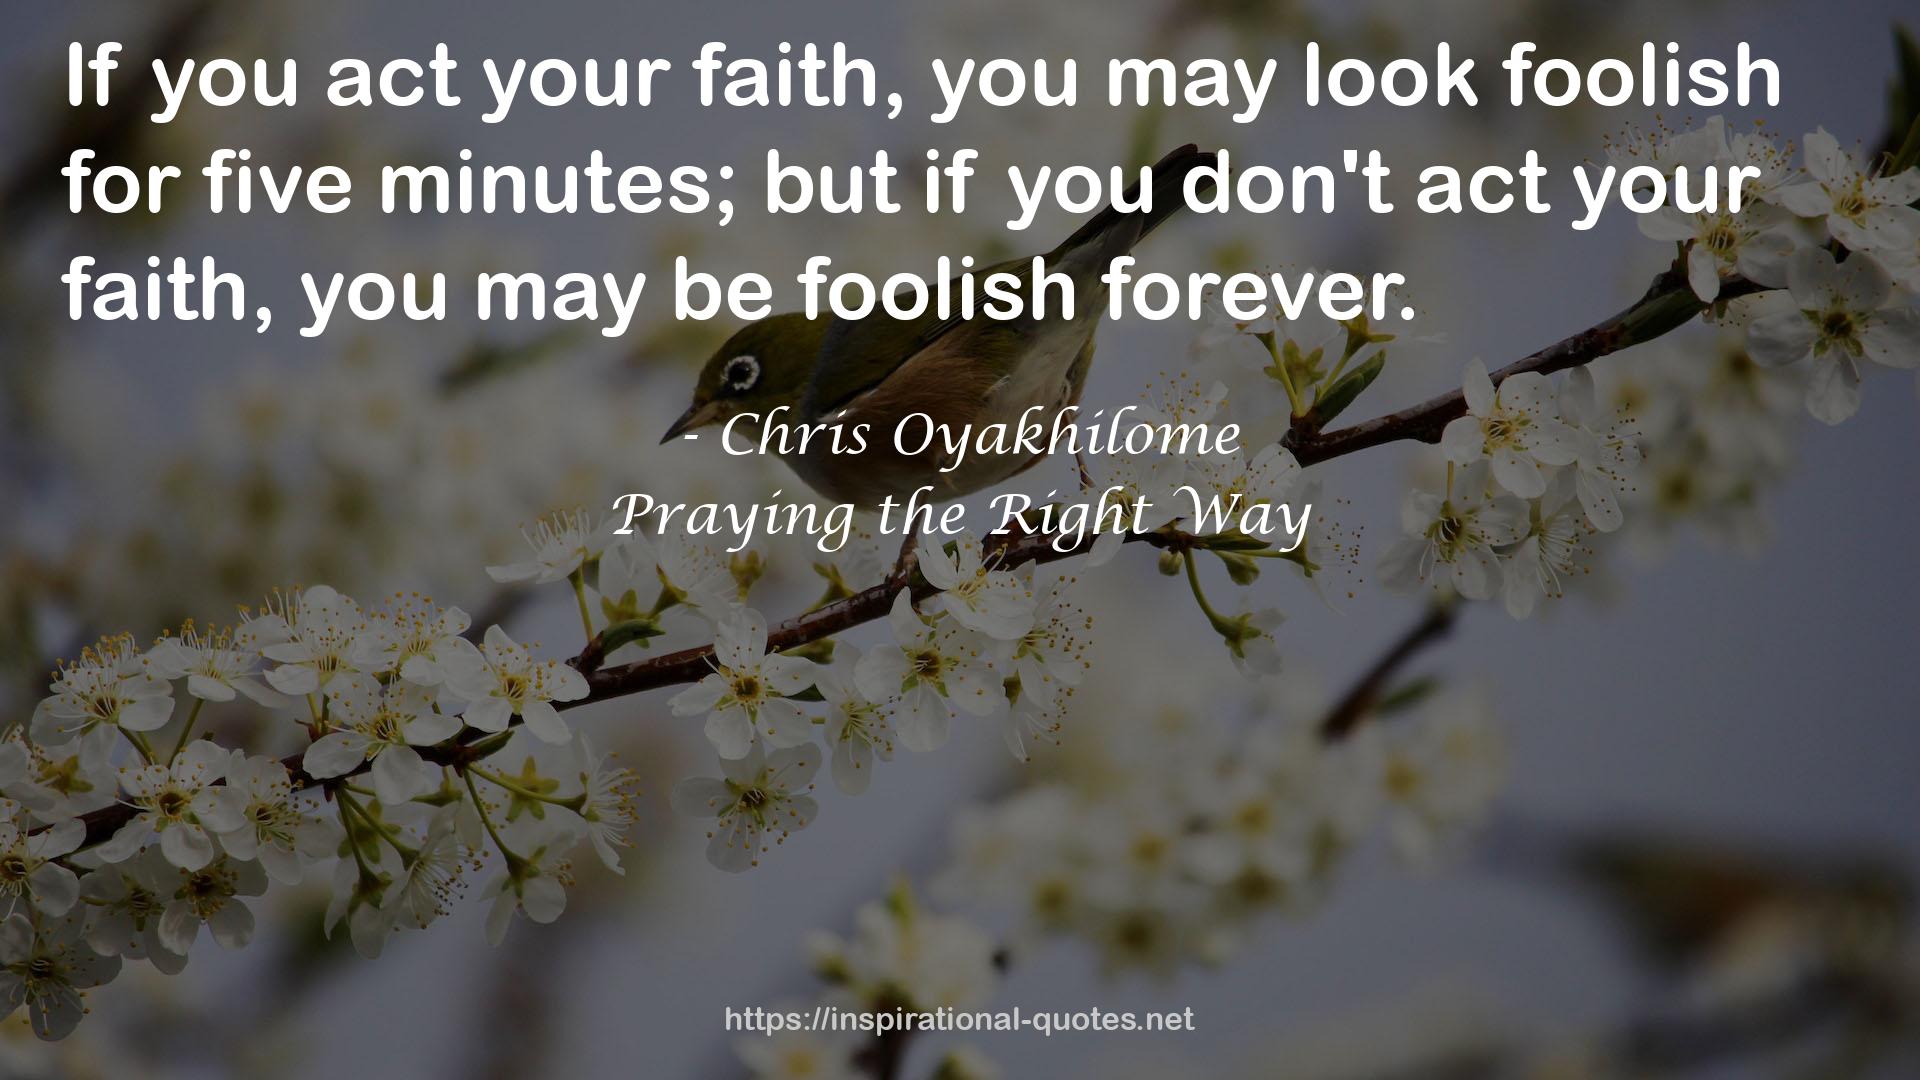 Praying the Right Way QUOTES